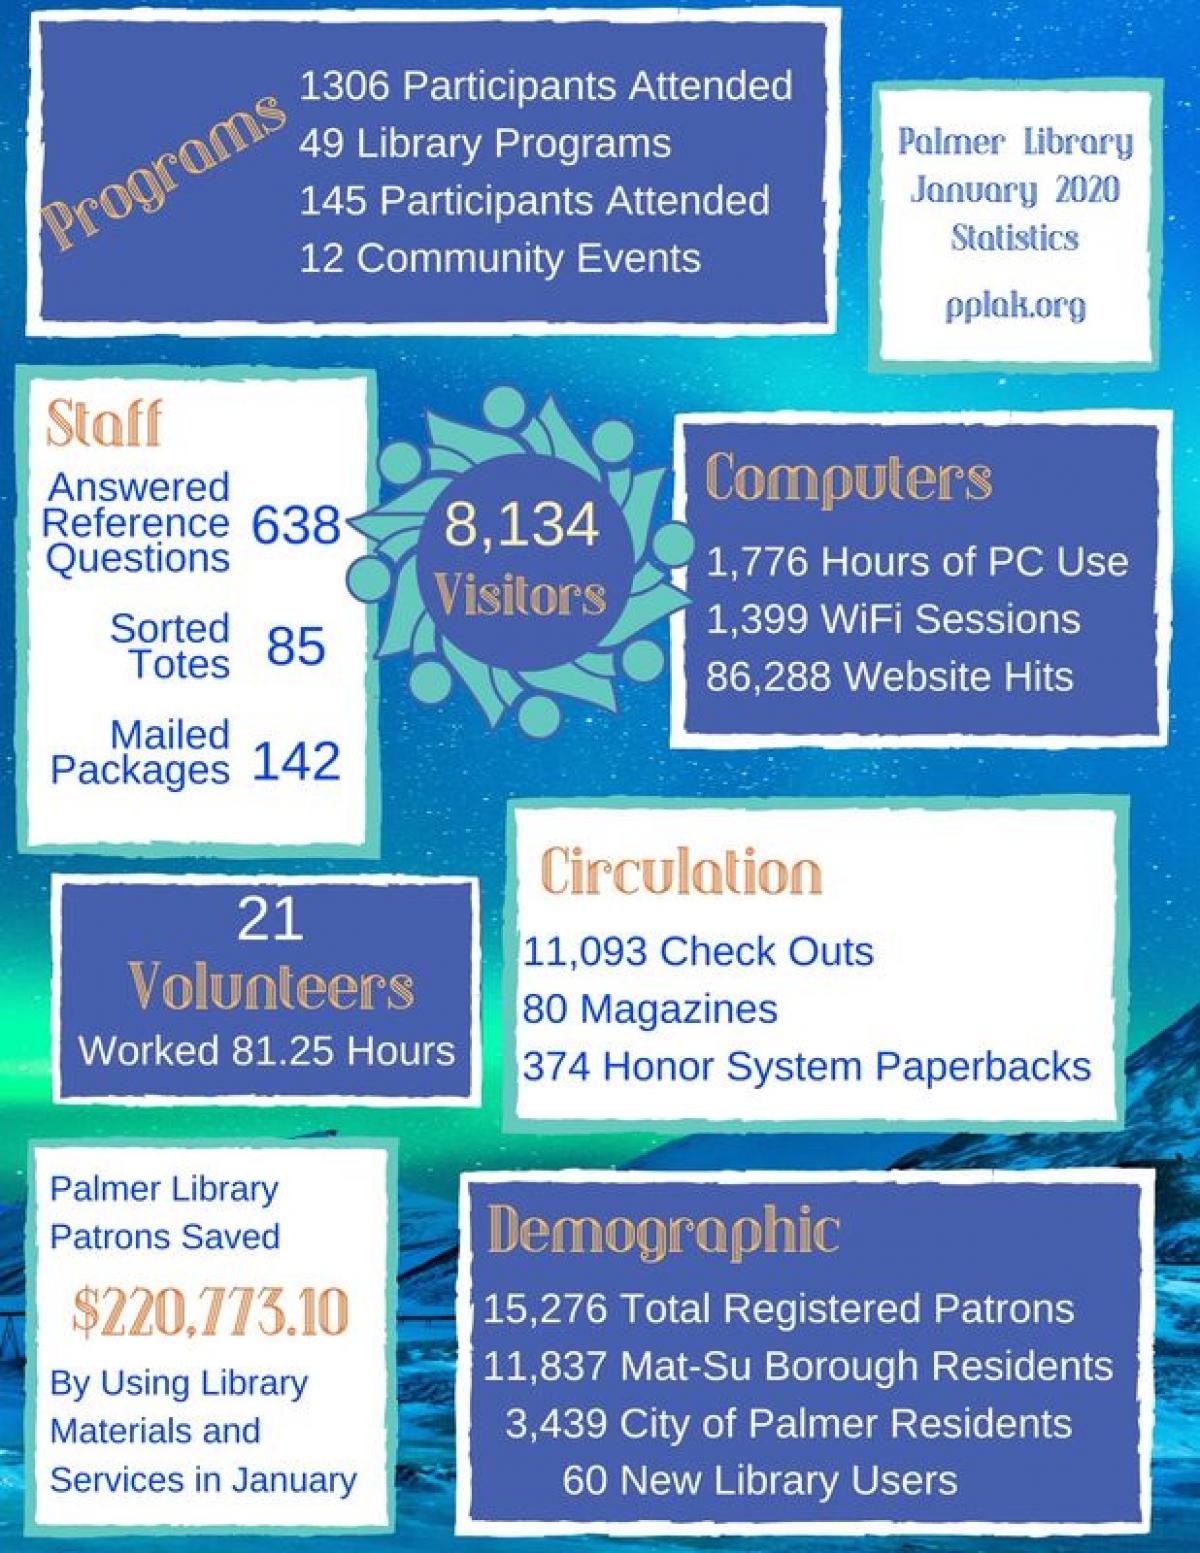 An infographic displaying the information from the link below